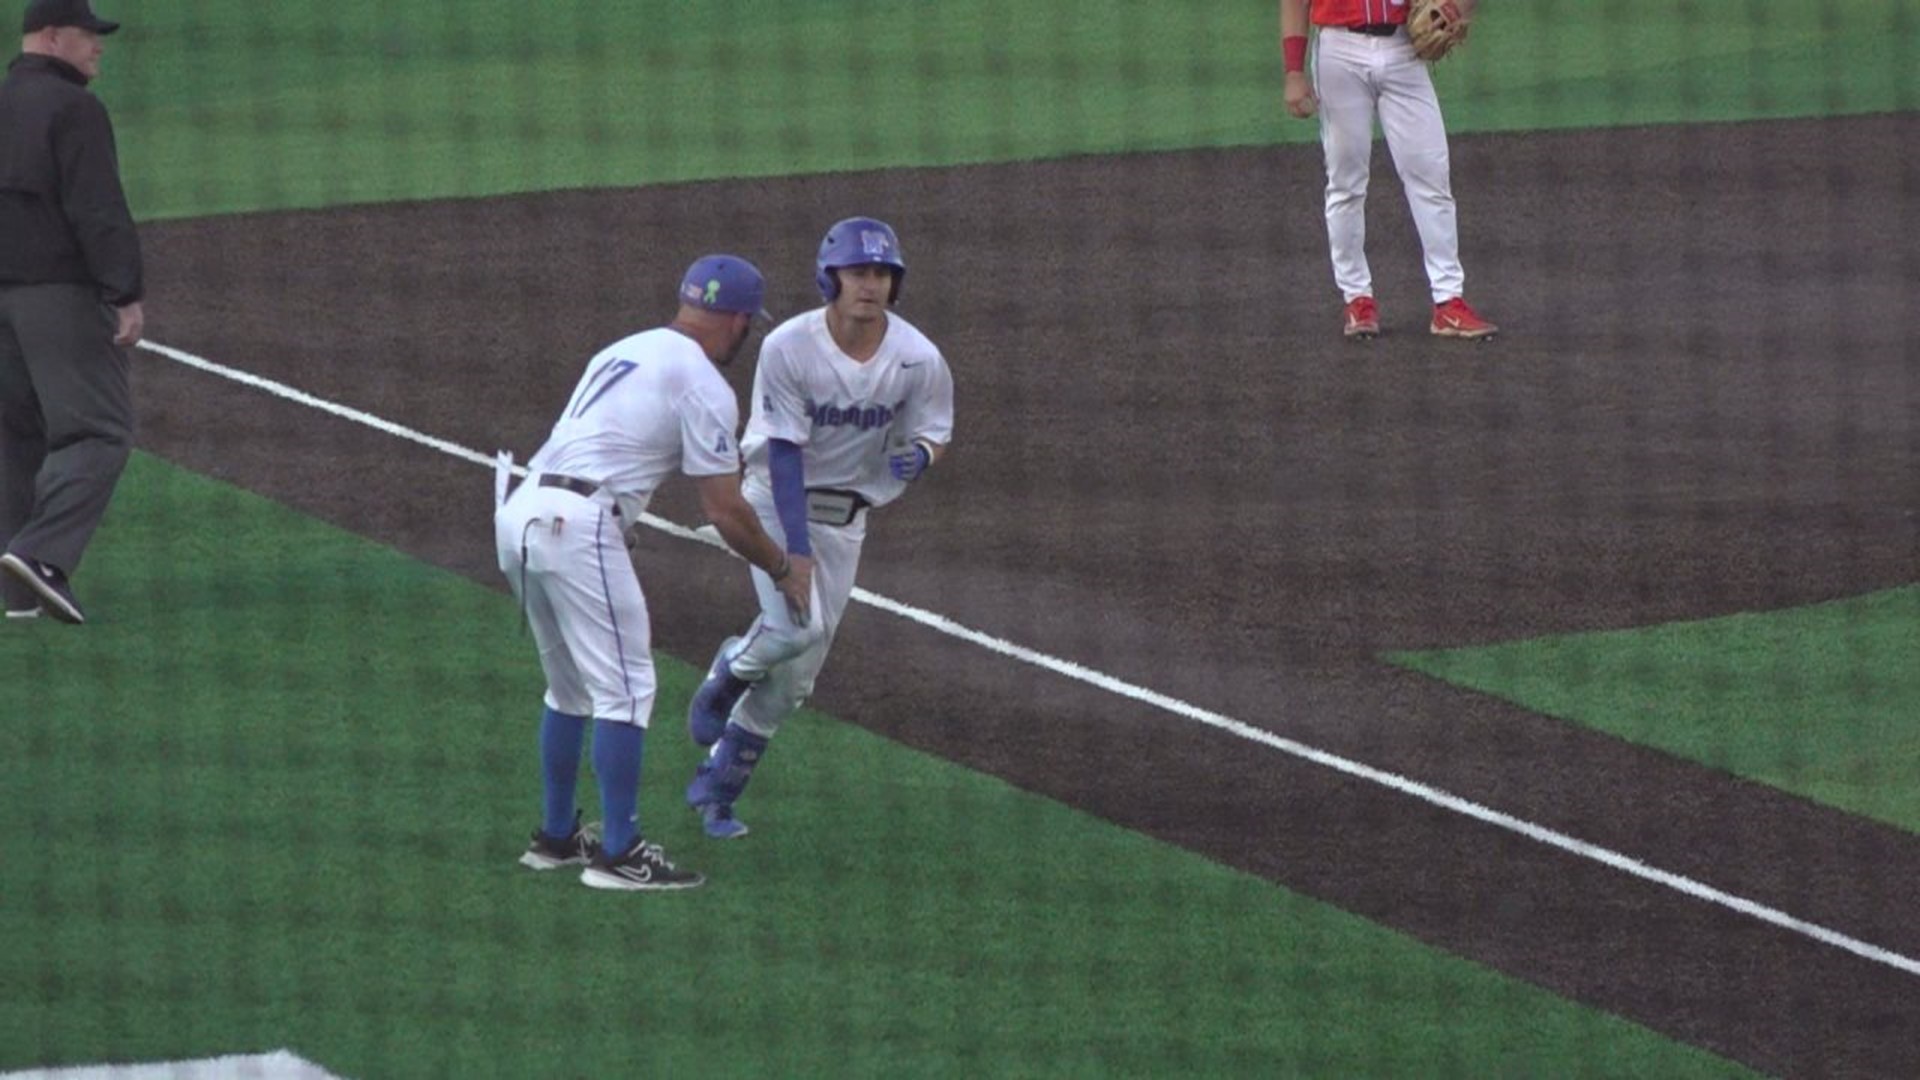 WATCH: Memphis gets revenge for earlier season loss and beats Ole Miss, 9-4 at home for the first time since 2017.